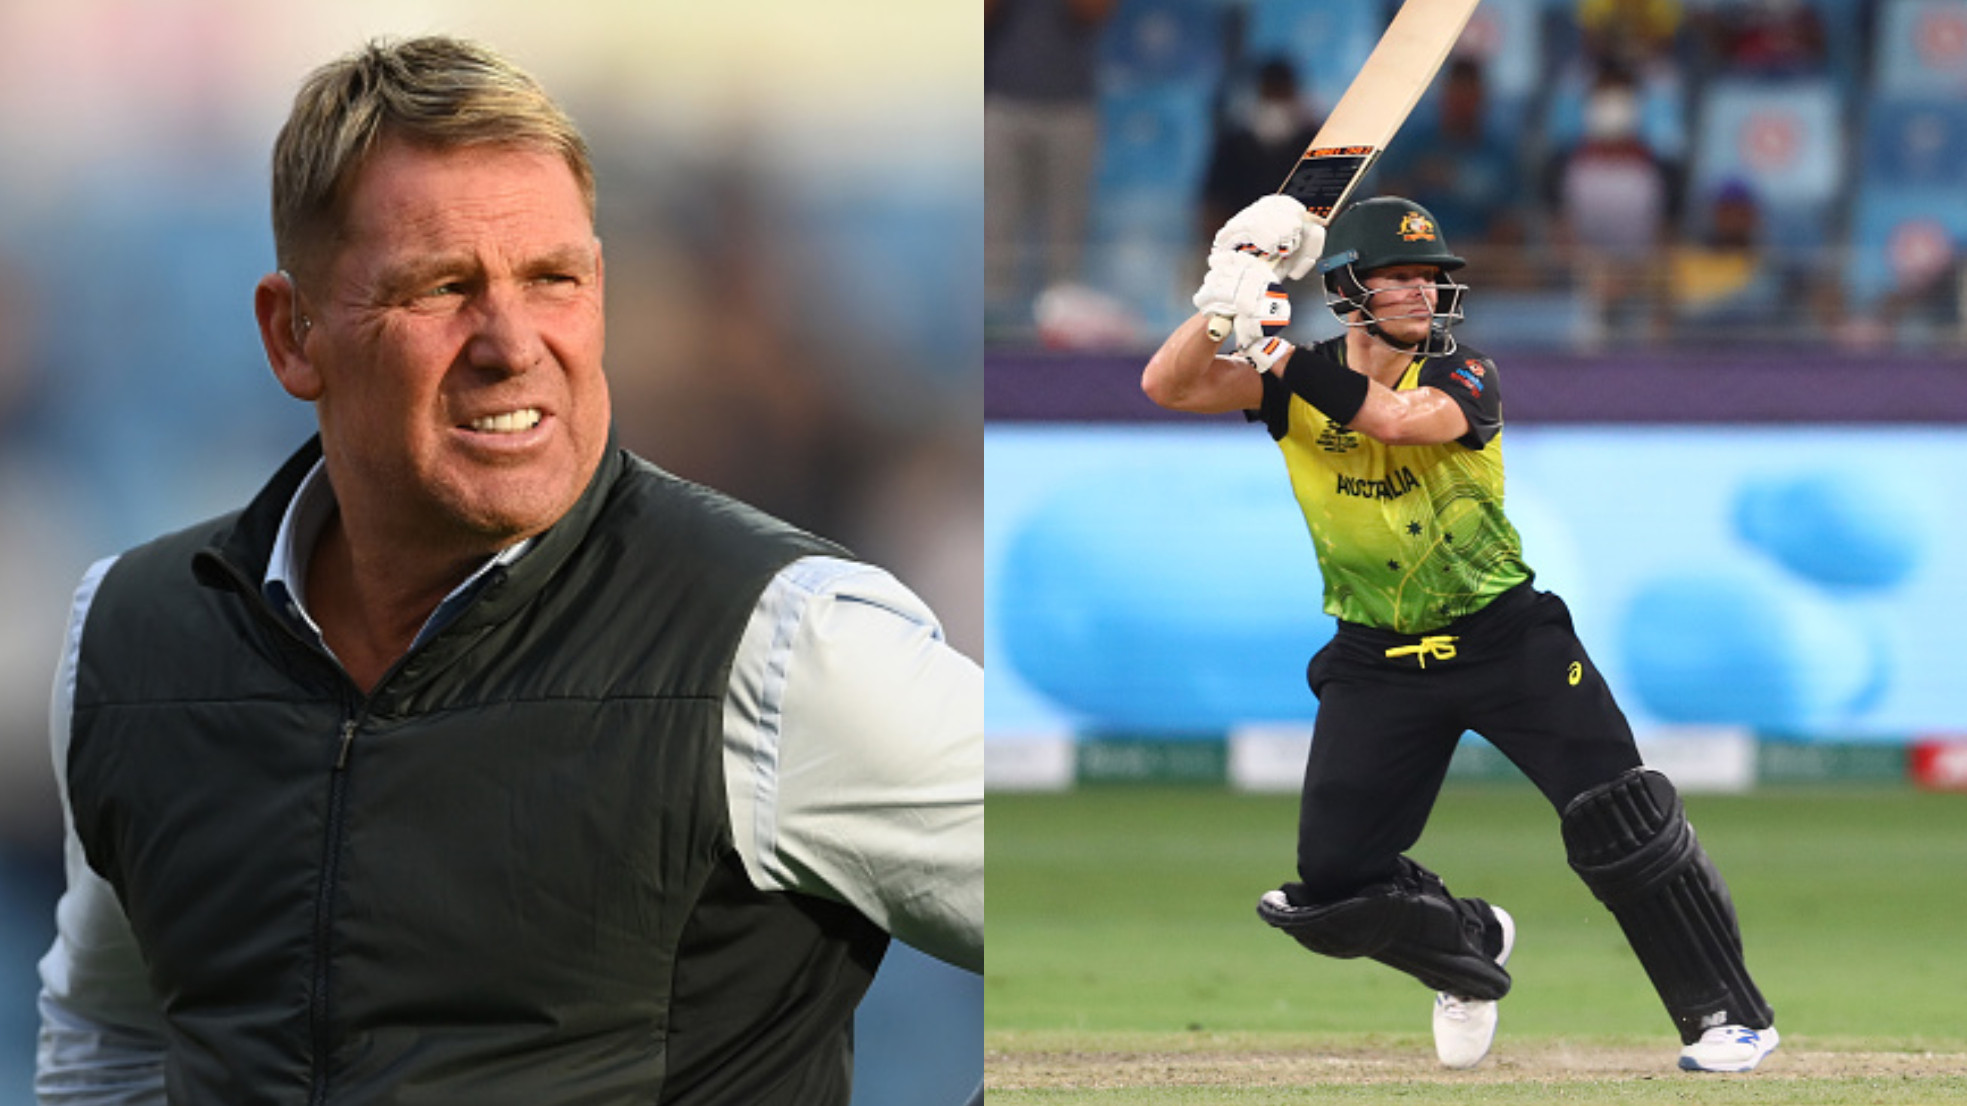 T20 World Cup 2021: Love Smith, but he shouldn’t be in the T20 team, says Warne after Australia's loss to England